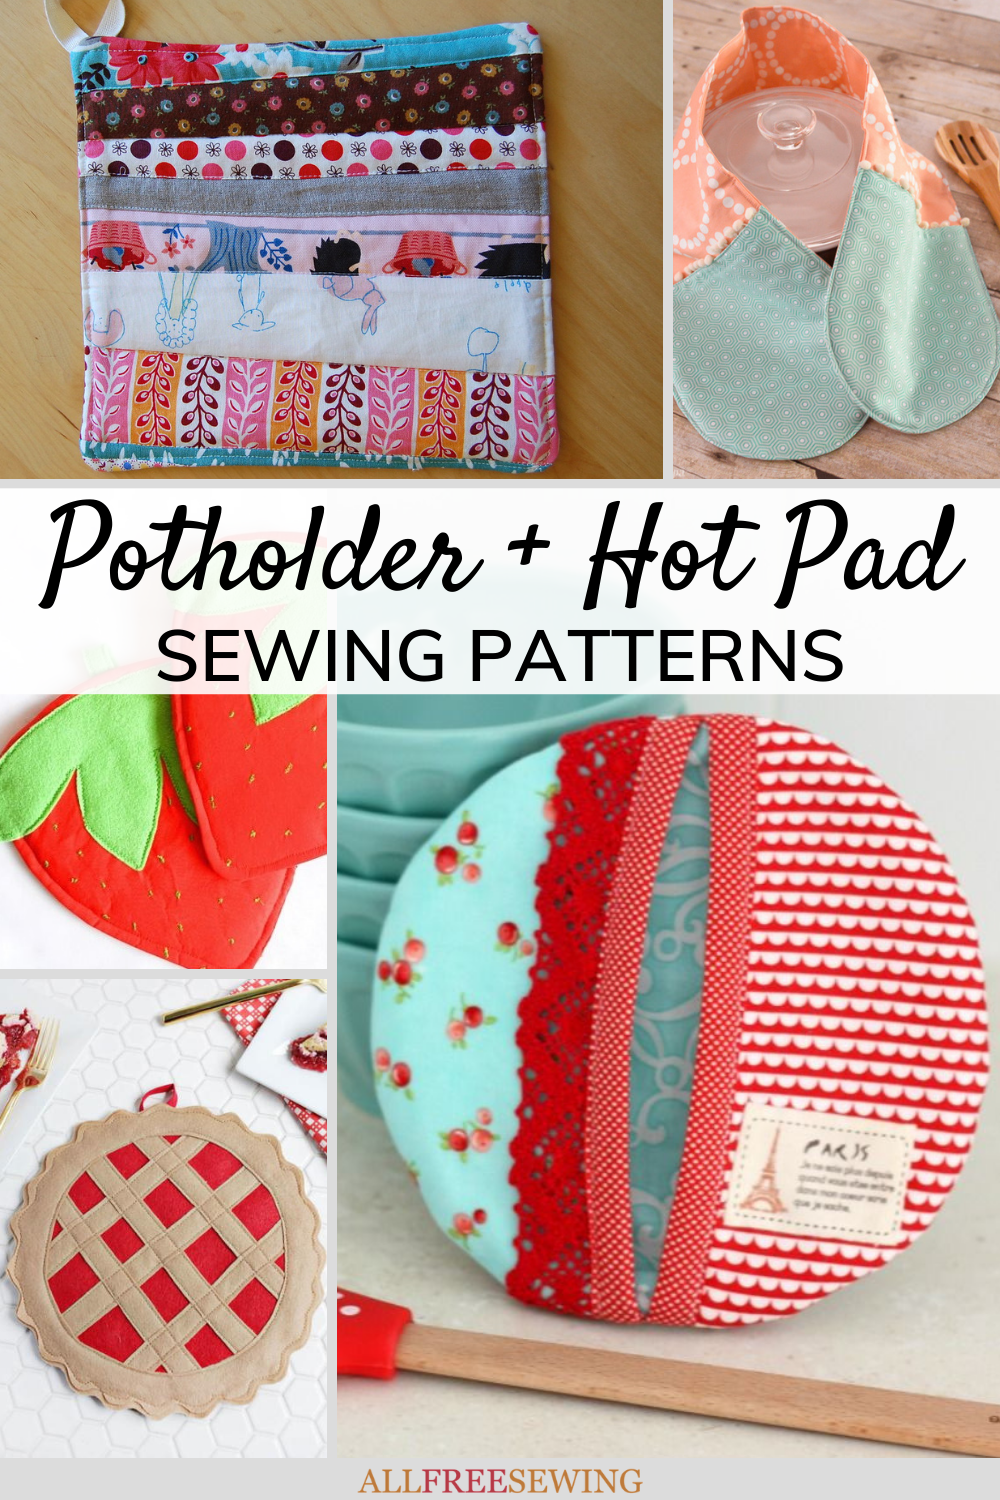 https://irepo.primecp.com/2021/09/503801/Potholder-Sewing-Patterns-pin21_ExtraLarge1000_ID-4463700.png?v=4463700